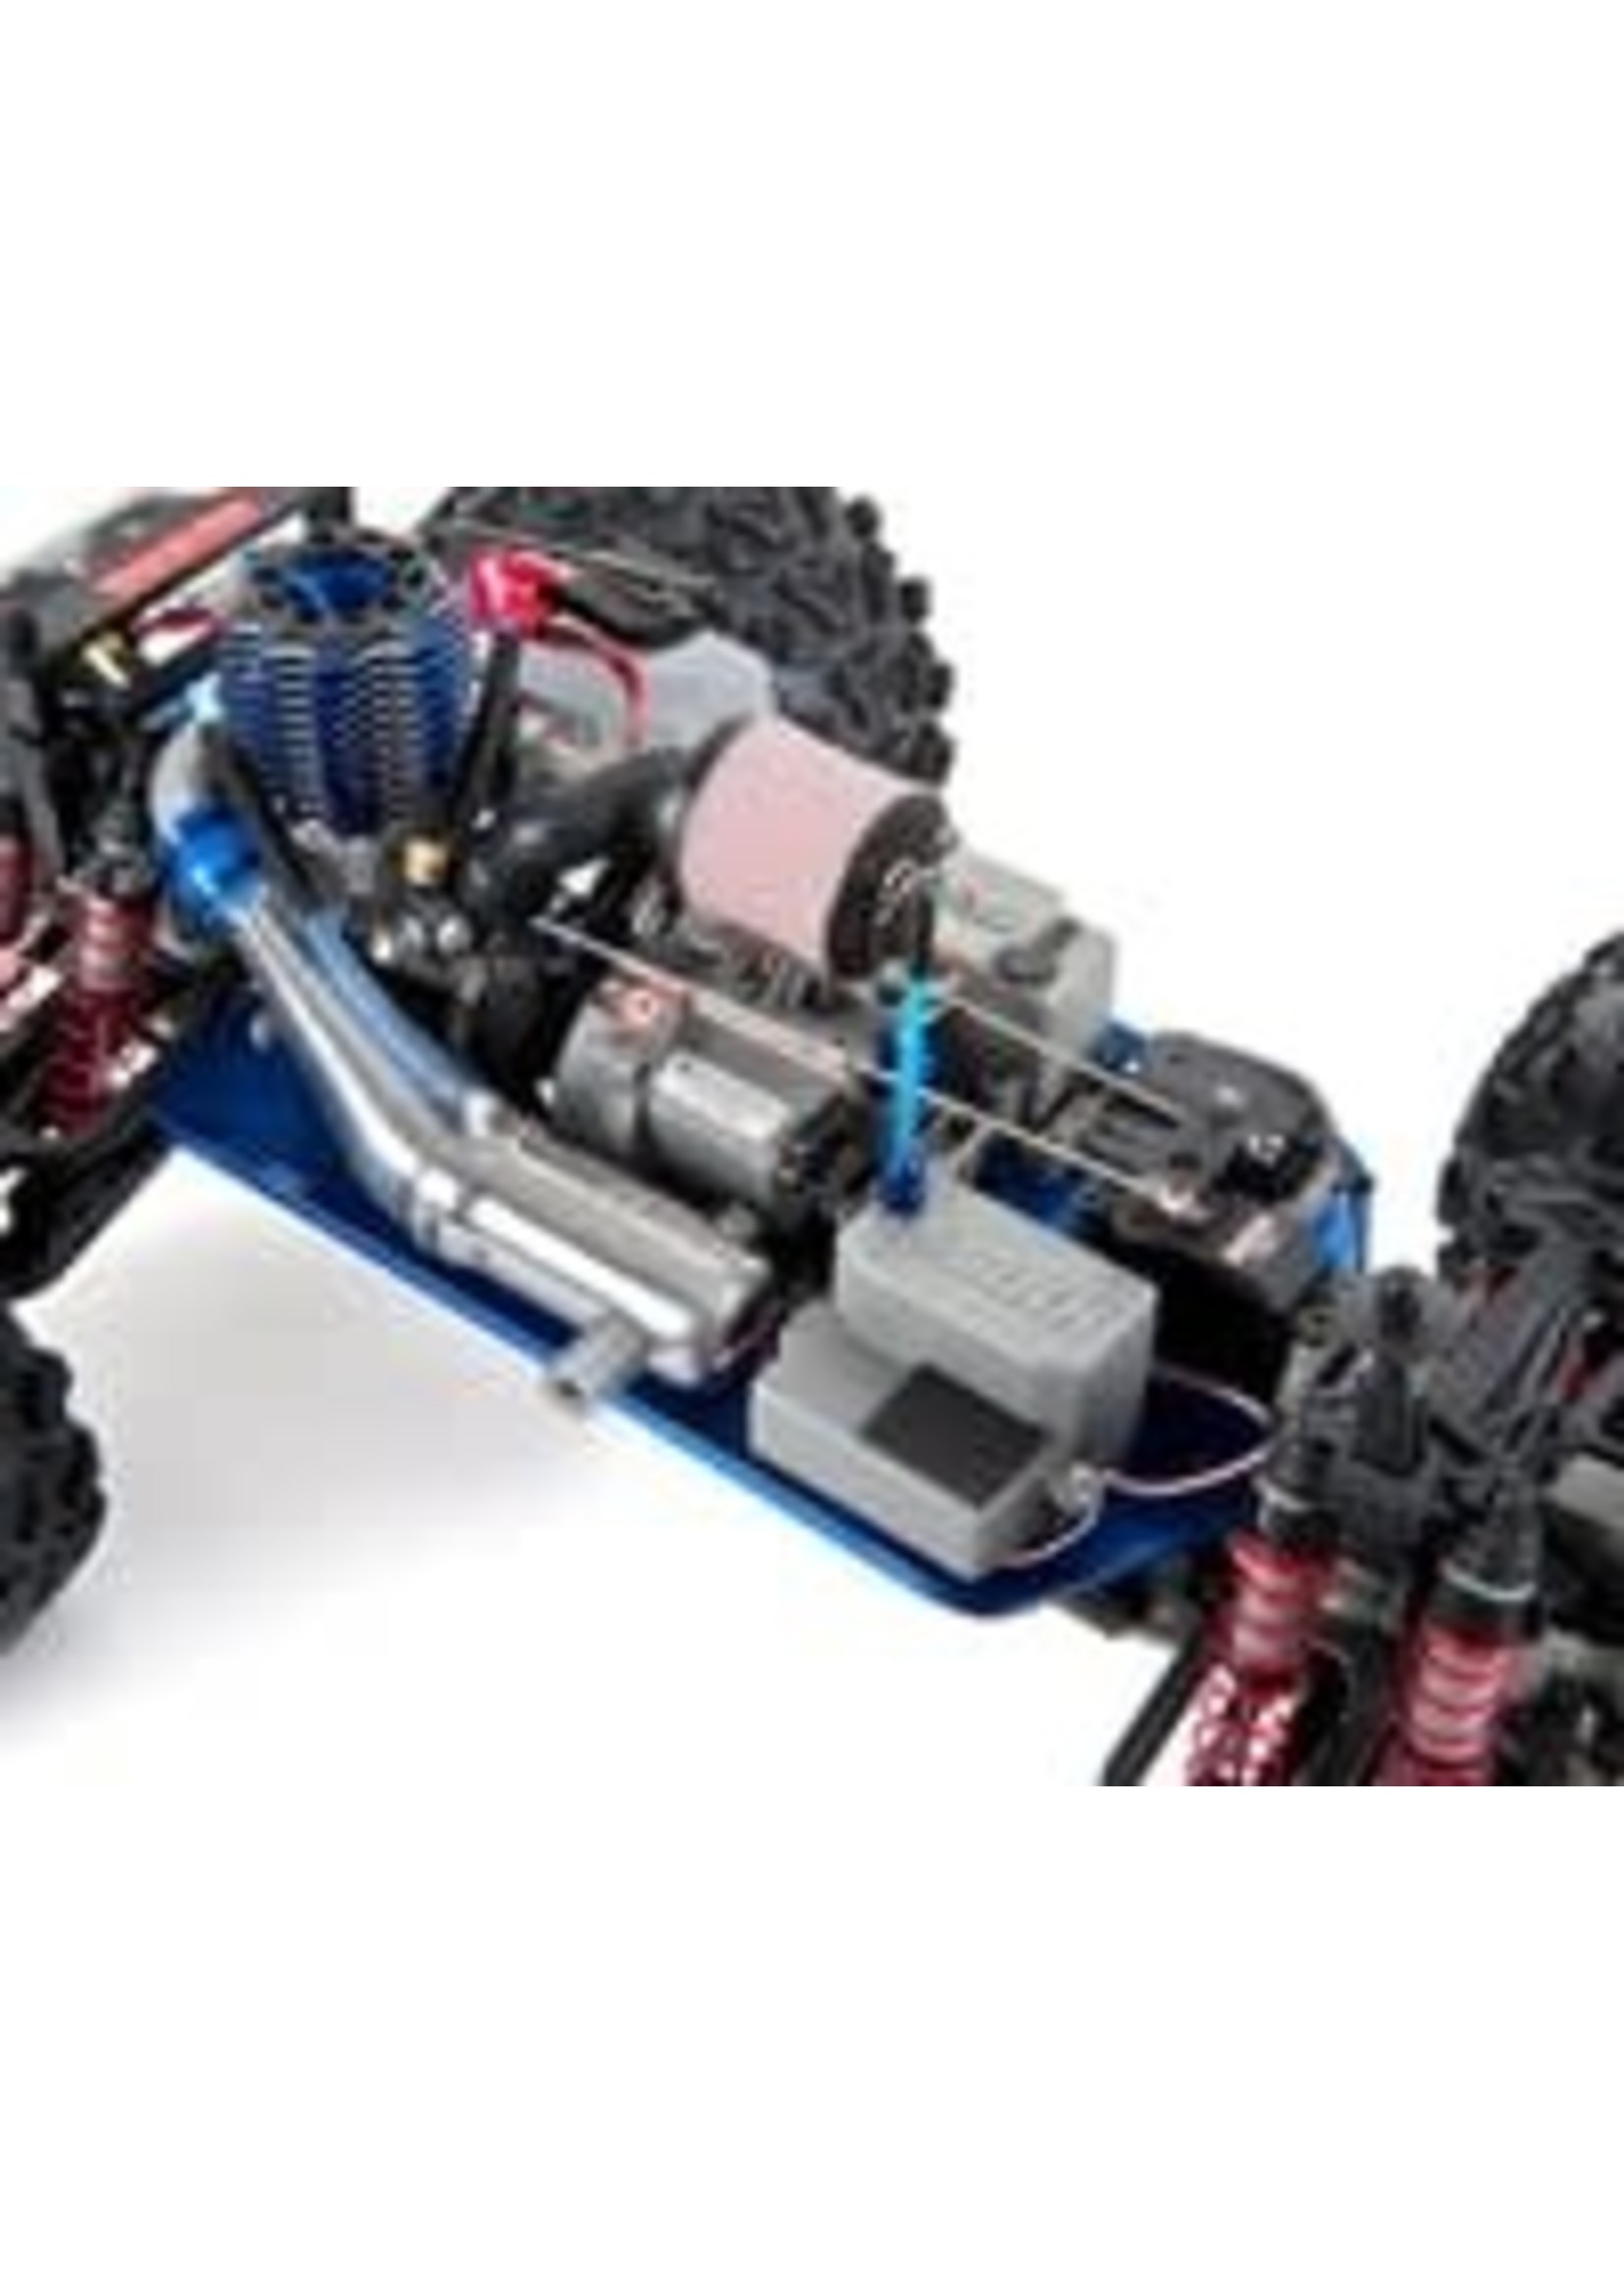 Traxxas 49077-3-RED T-Maxx 3.3: 1/10 Scale Nitro-Powered 4WD Maxx Monster Truck with TQi 2.4GHz Radio System, Traxxas Link  Wireless Module, and Traxxas Stability Management (TSM)